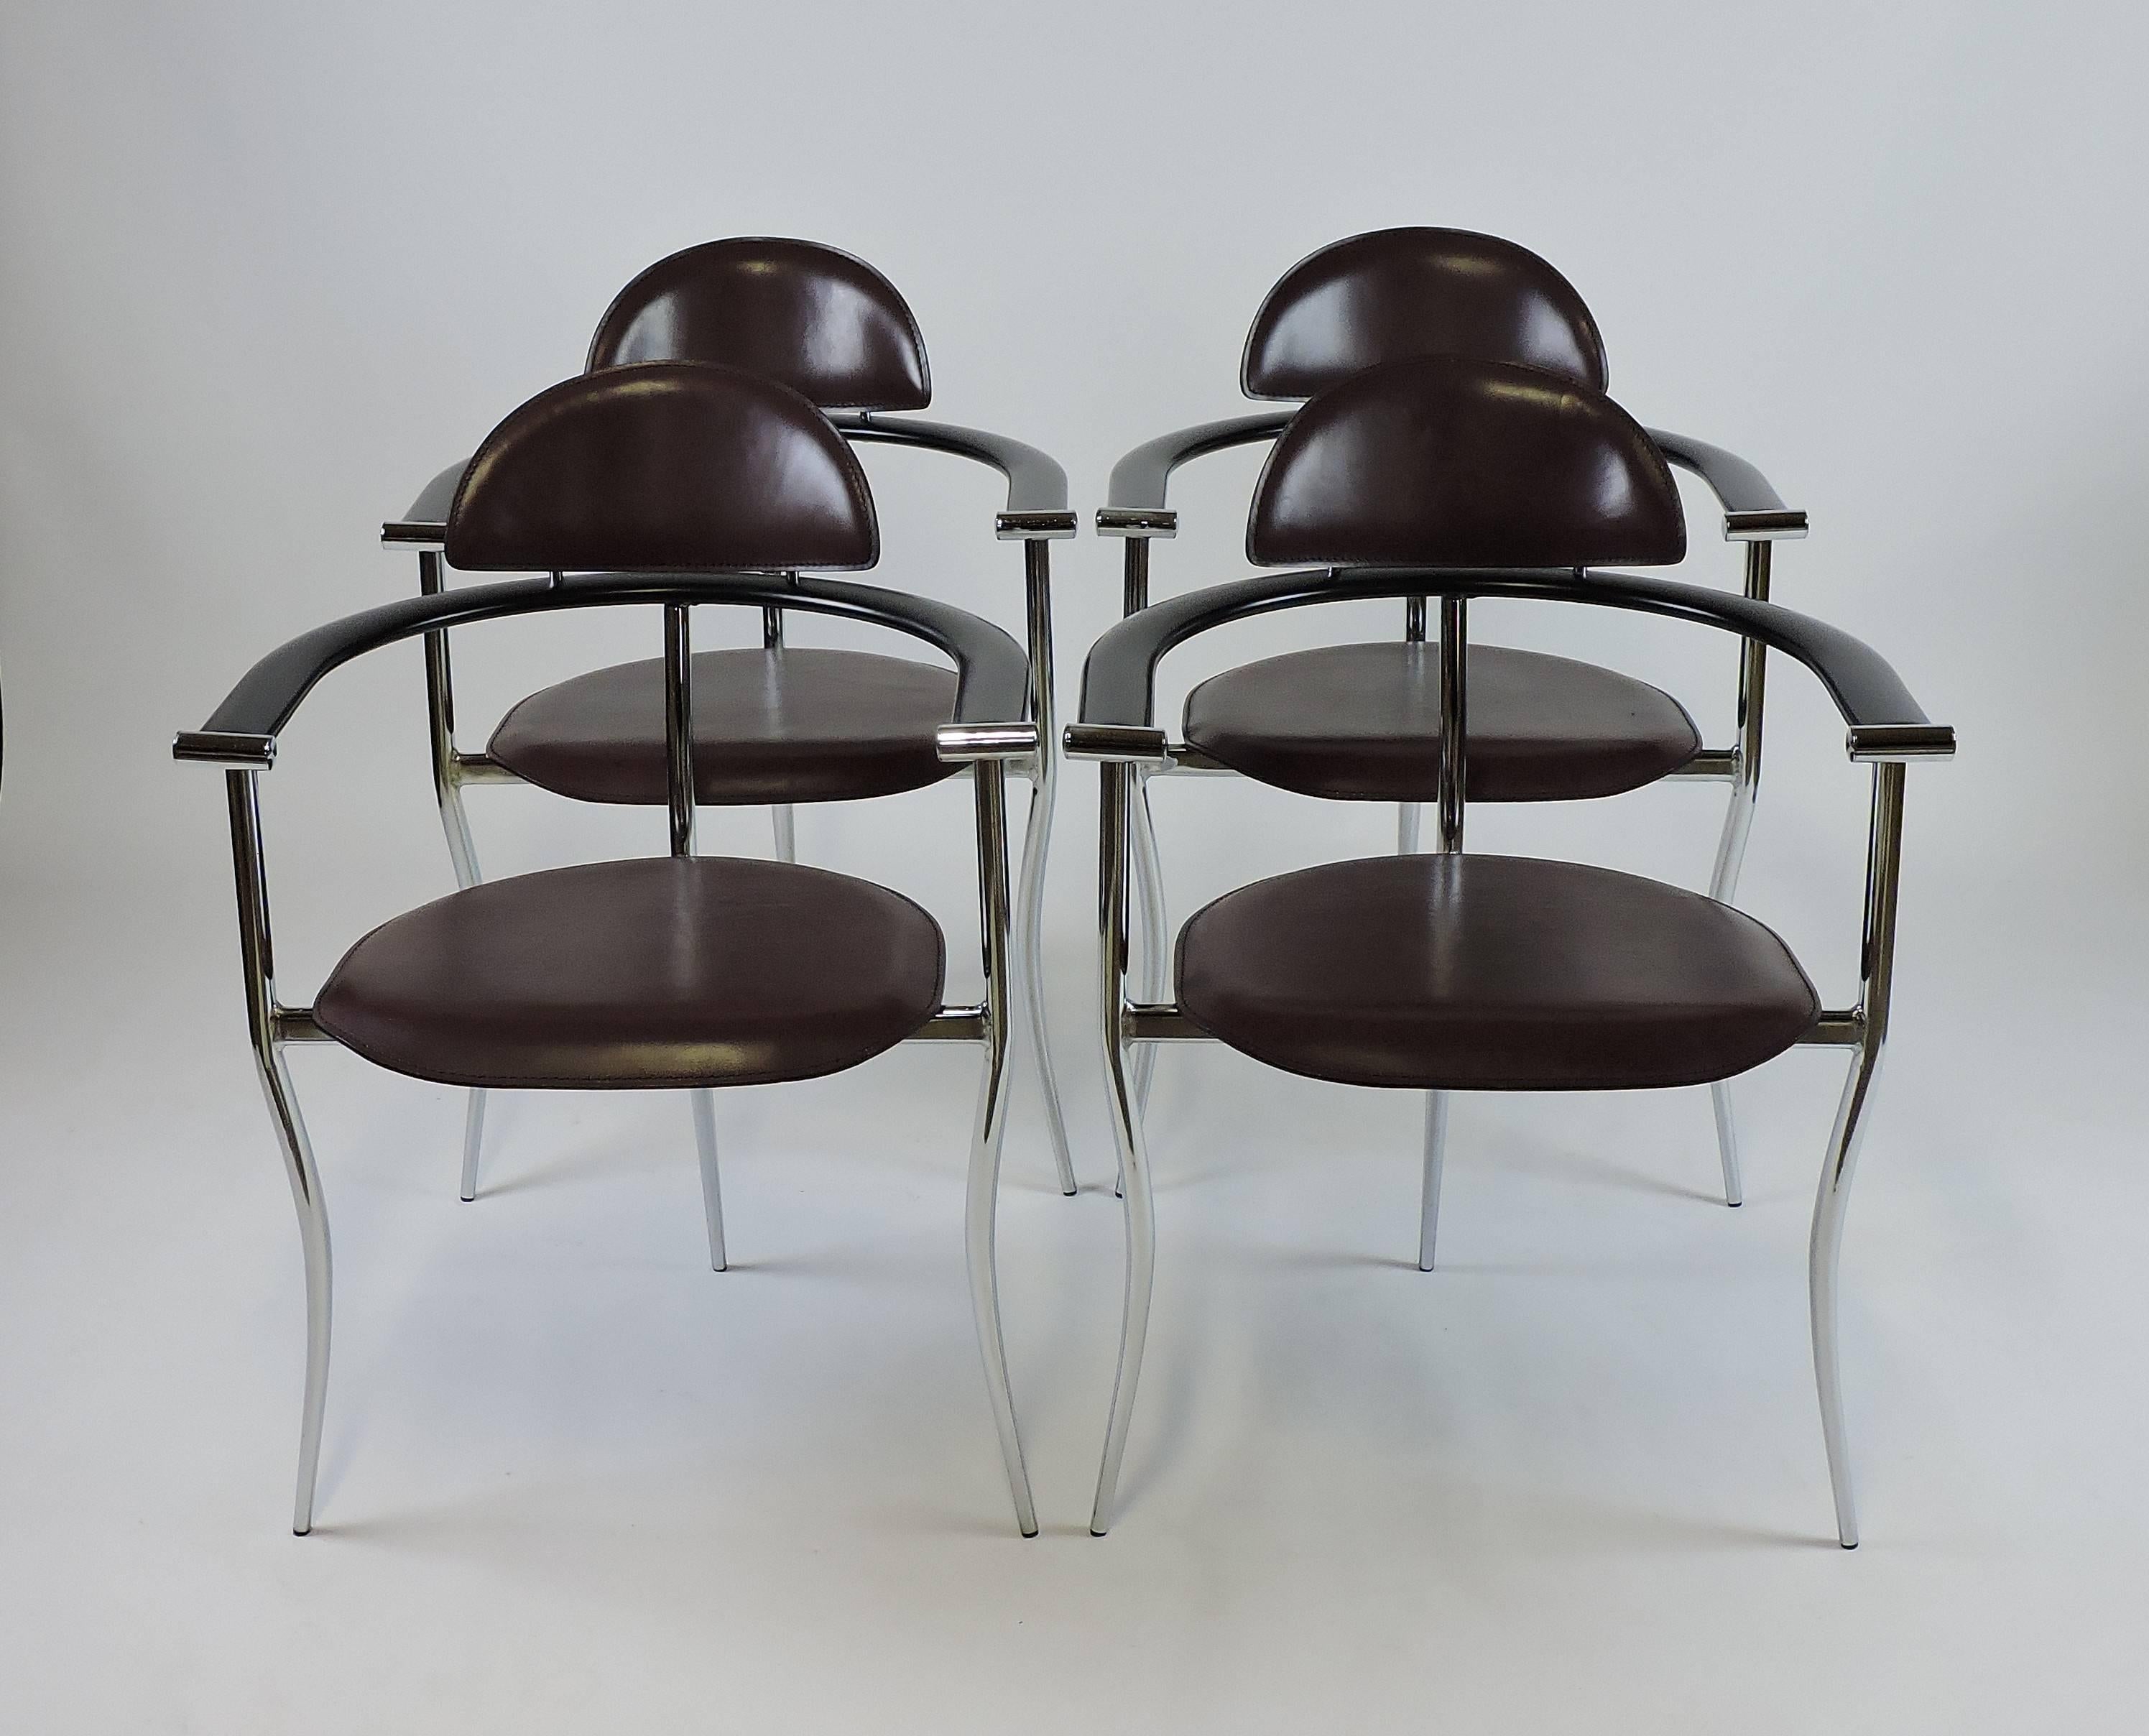 Striking set of four Marilyn chairs manufactured in Italy by Arrben. These chairs have wavy chrome frames, deep burgundy color leather seats and head rests, and black lacquered wooden arms.
  